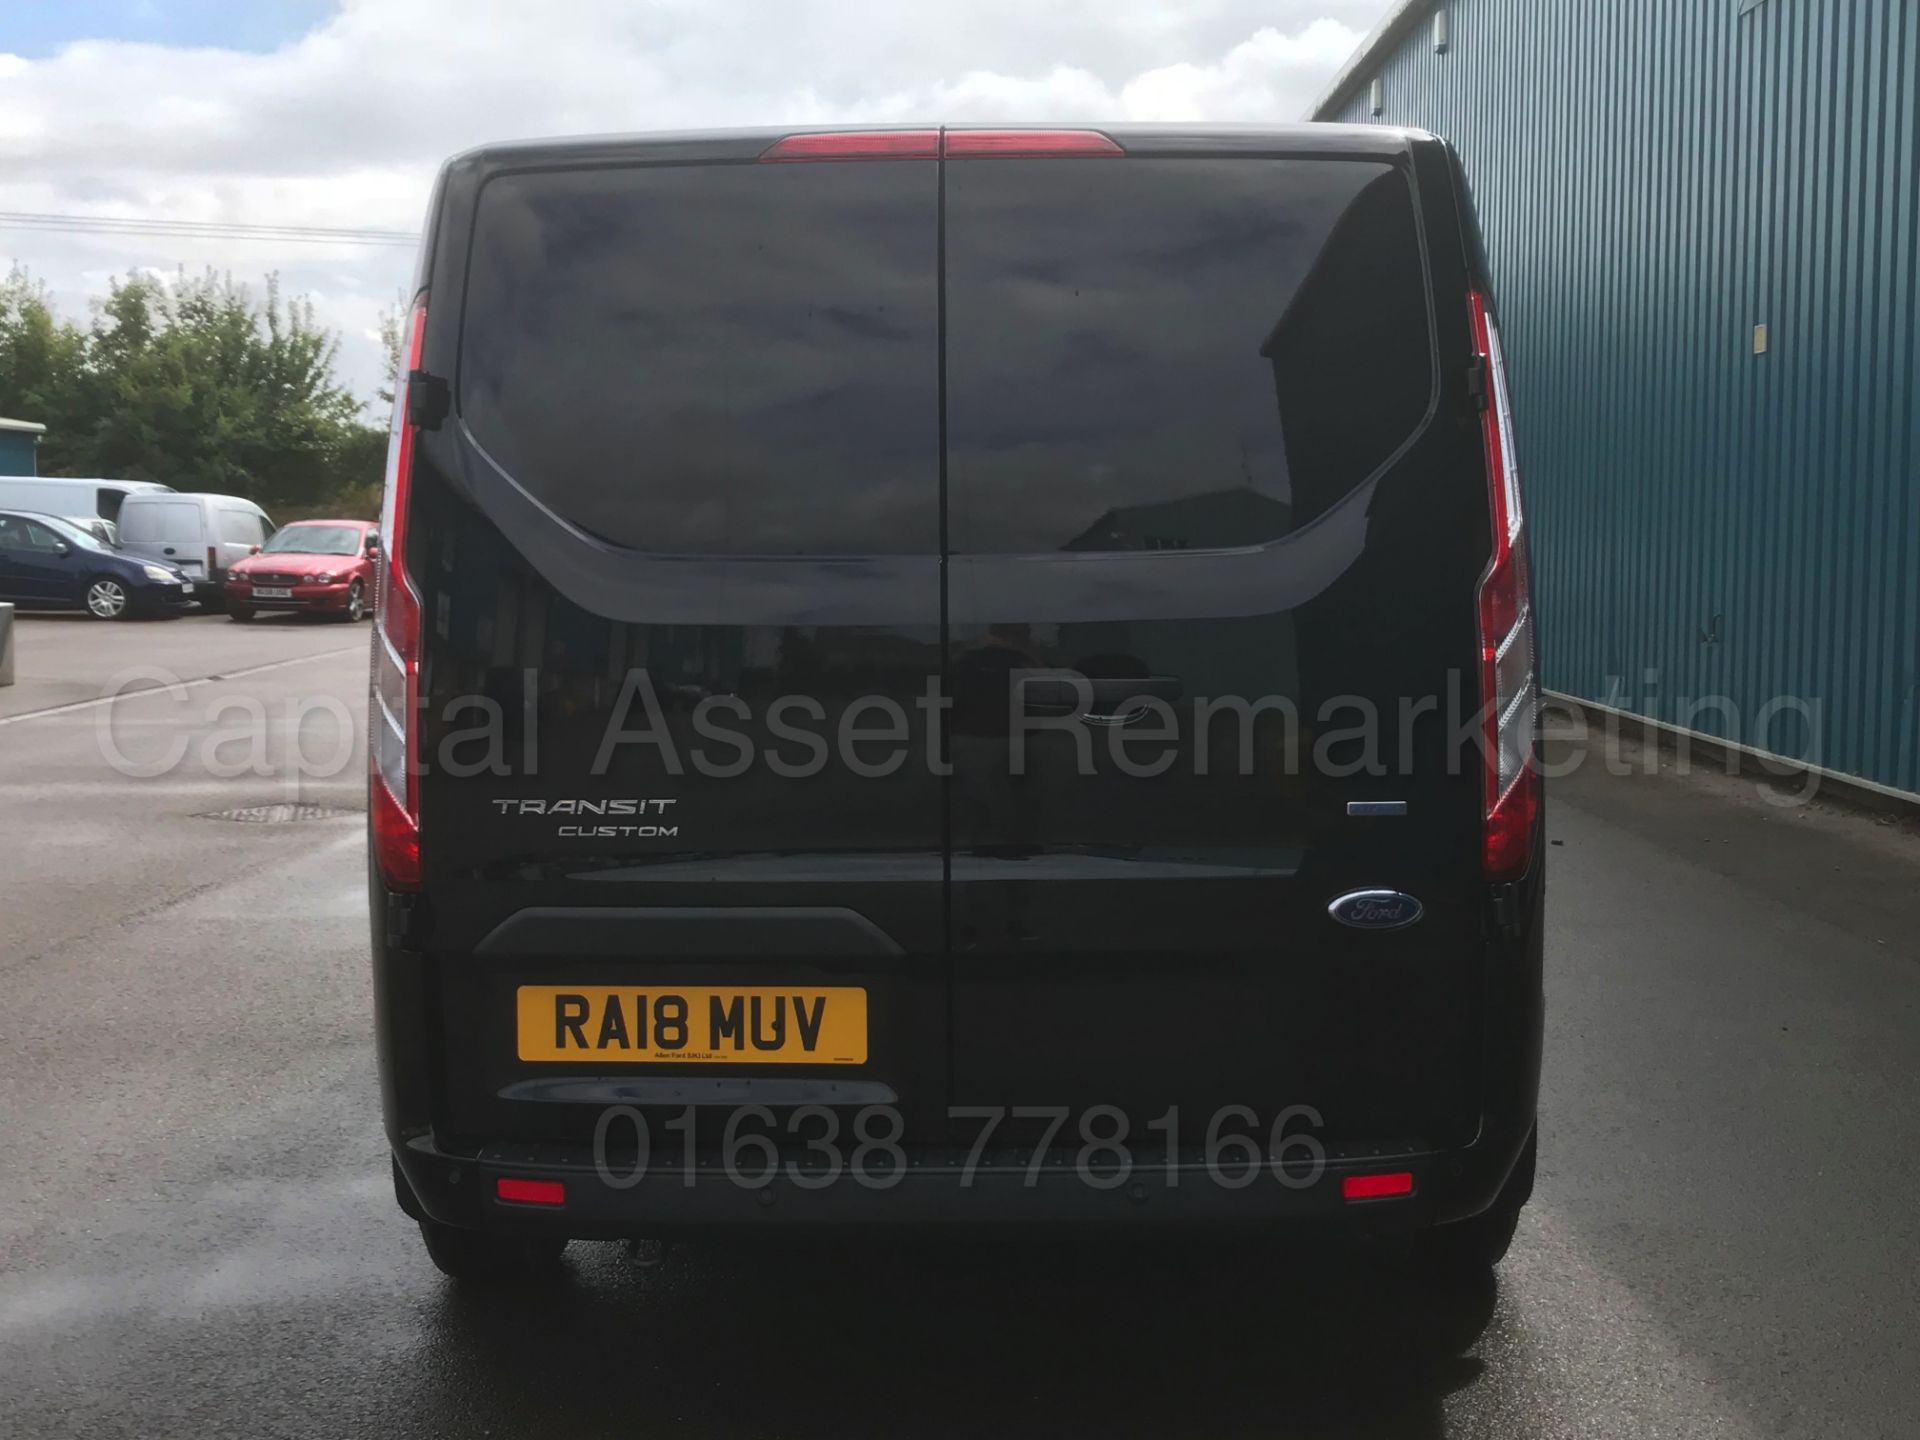 FORD TRANSIT CUSTOM *TREND EDITION* (2018 - ALL NEW MODEL) '2.0 TDCI - 6 SPEED' *DELIVERY MILEAGE* - Bild 10 aus 49